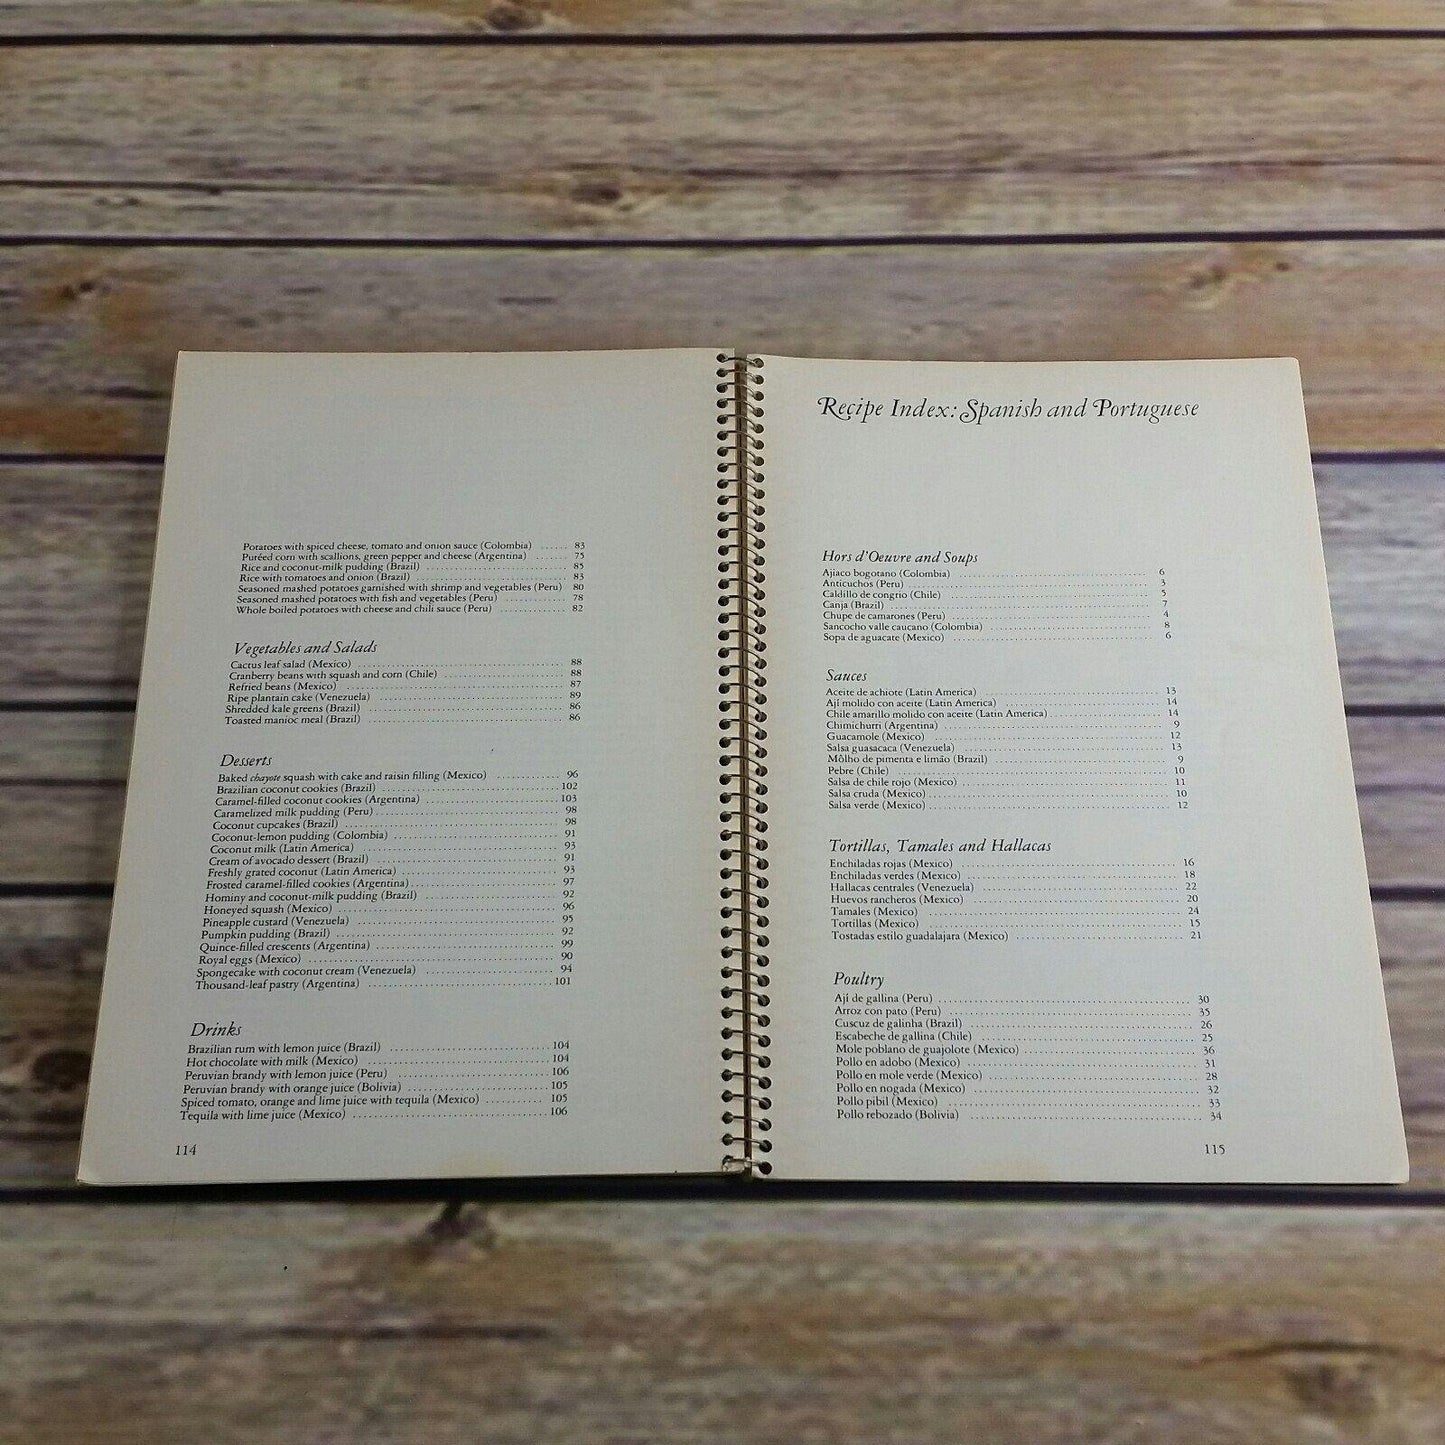 Vtg Latin American Cookbook Recipes Latin America Cooking  Life Books Foods of the World 1968 Spiral Bound Latin Food Recipes